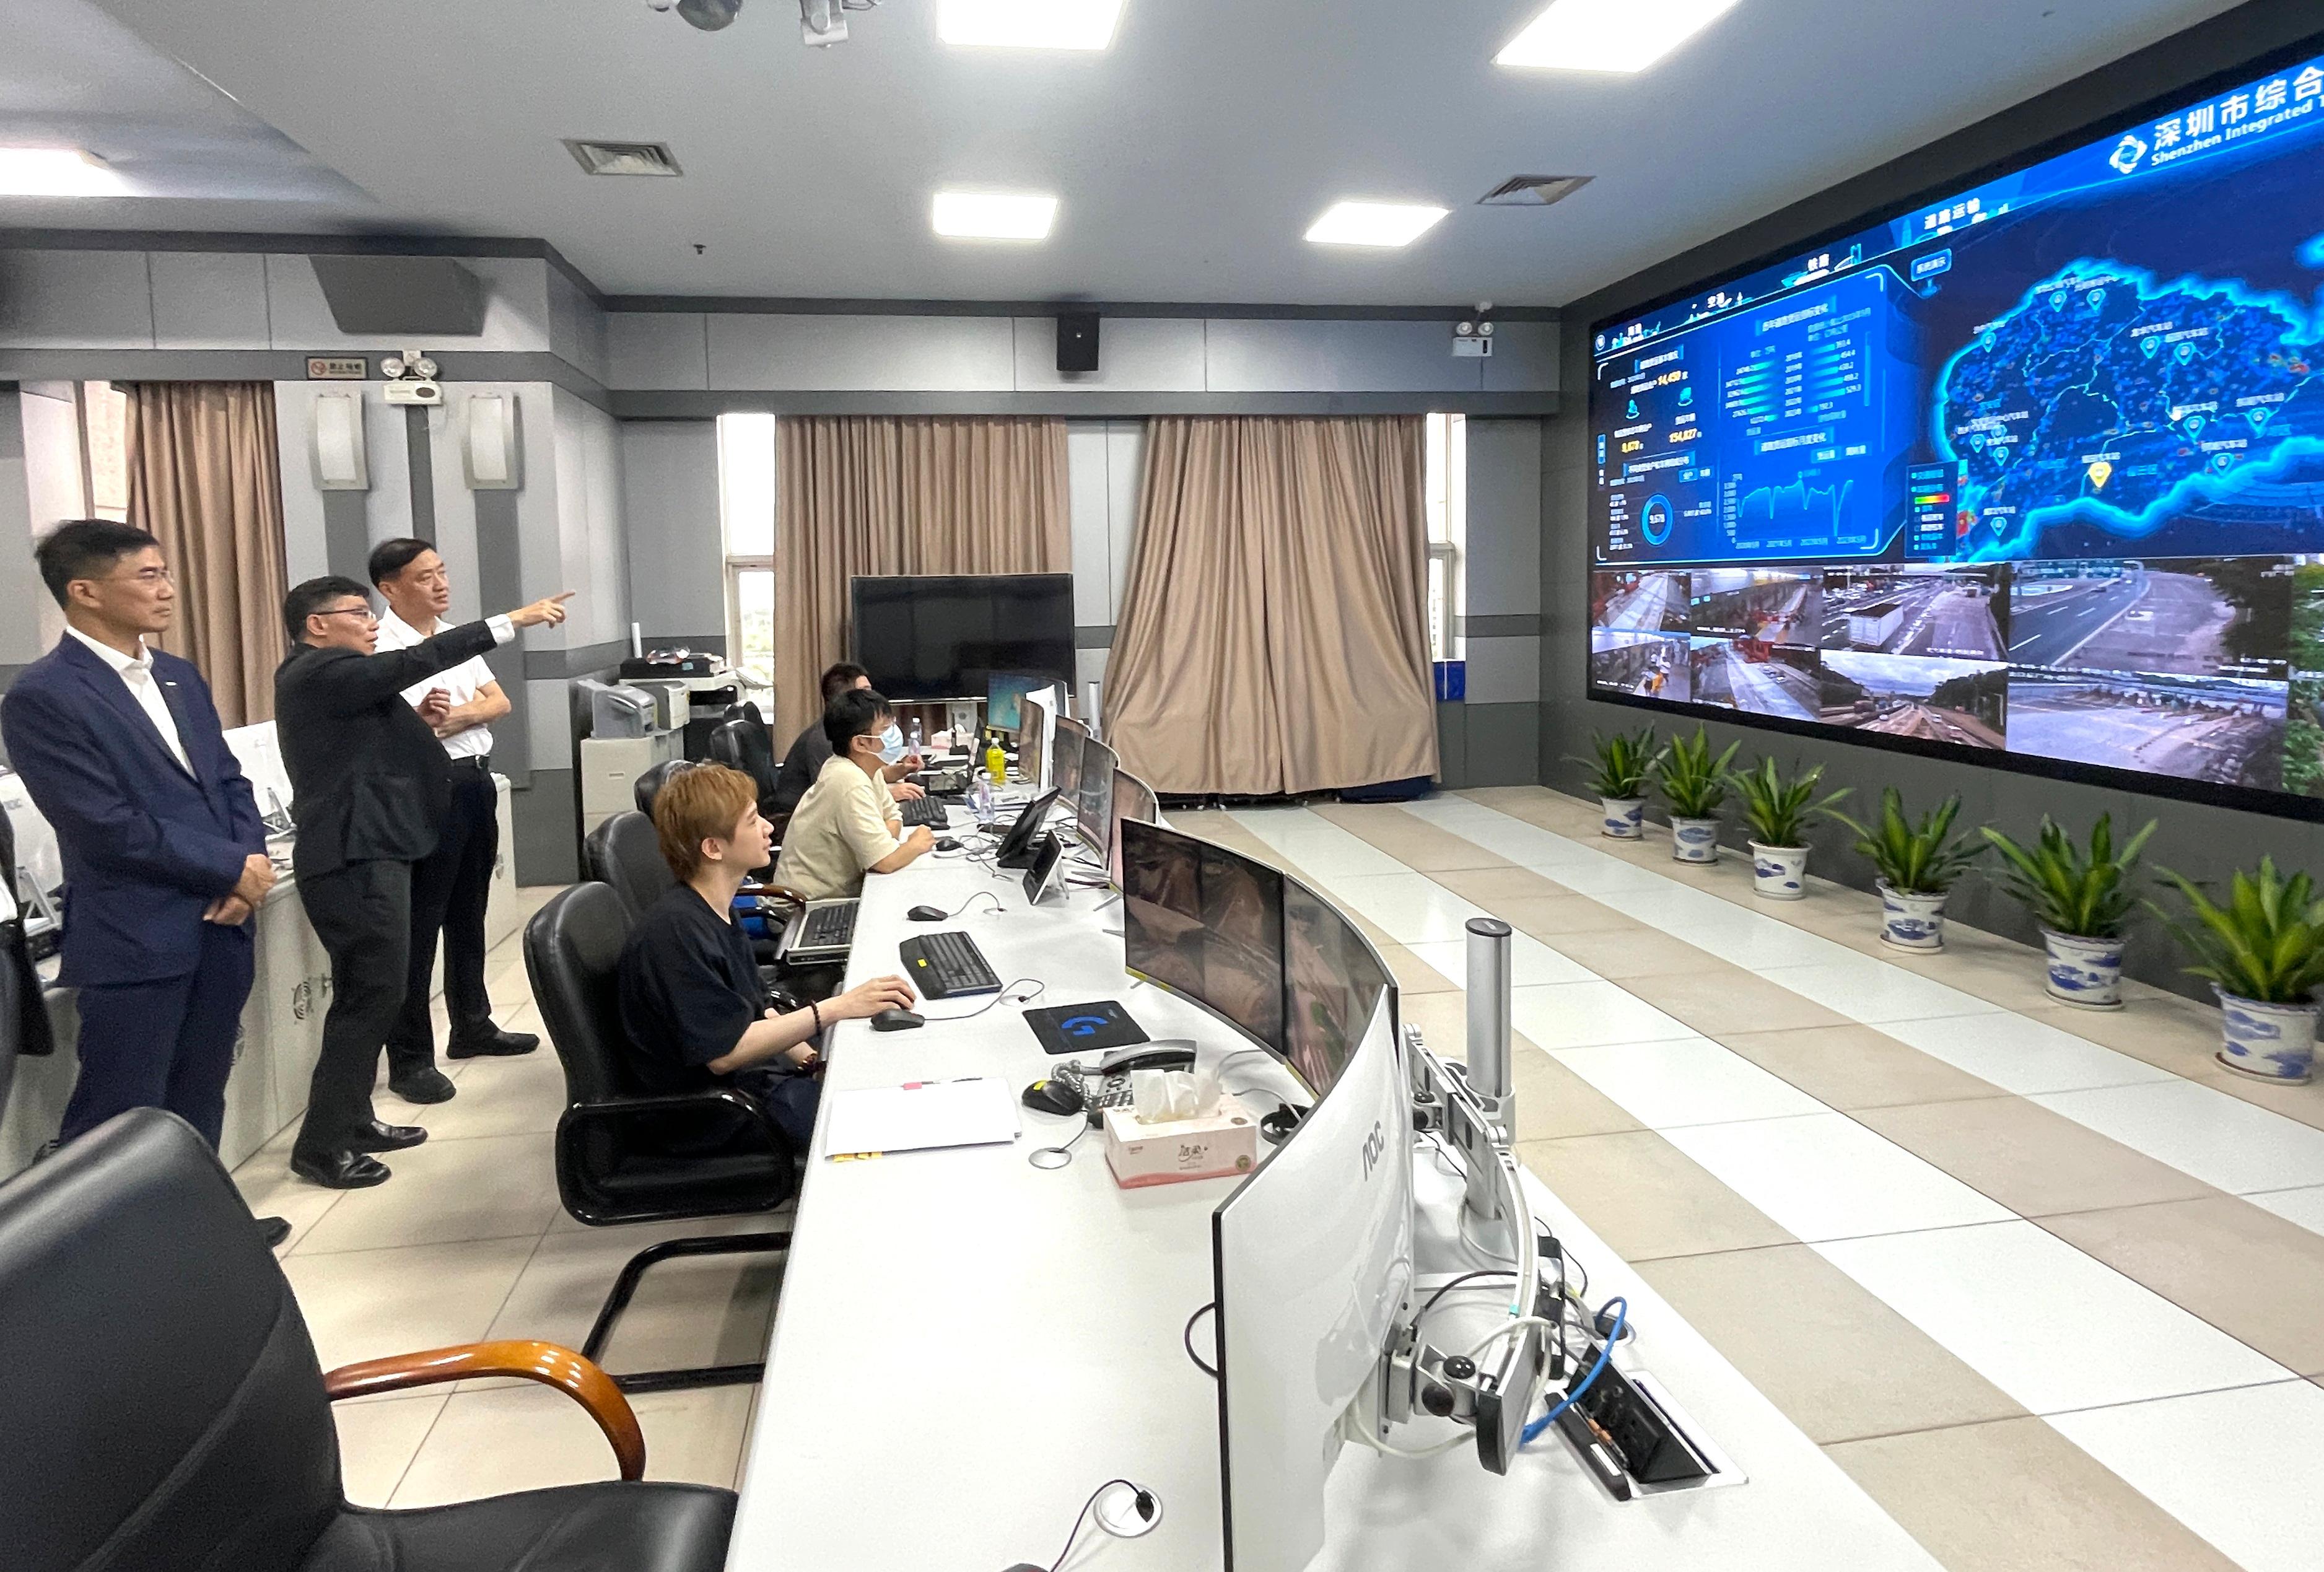 The Secretary for Transport and Logistics, Mr Lam Sai-hung, today (July 19) visited the Shenzhen Transportation Operation Command Center. Photo shows Mr Lam (second left), accompanied by the Chief Executive Officer of the Hong Kong Applied Science and Technology Research Institute, Dr Denis Yip (first left), being briefed by Deputy Director General of the Transport Bureau of the Shenzhen Municipality (Ports Administration of Shenzhen Municipality) Mr Xu Wei (third left), on the city's innovative traffic and transport management model. 